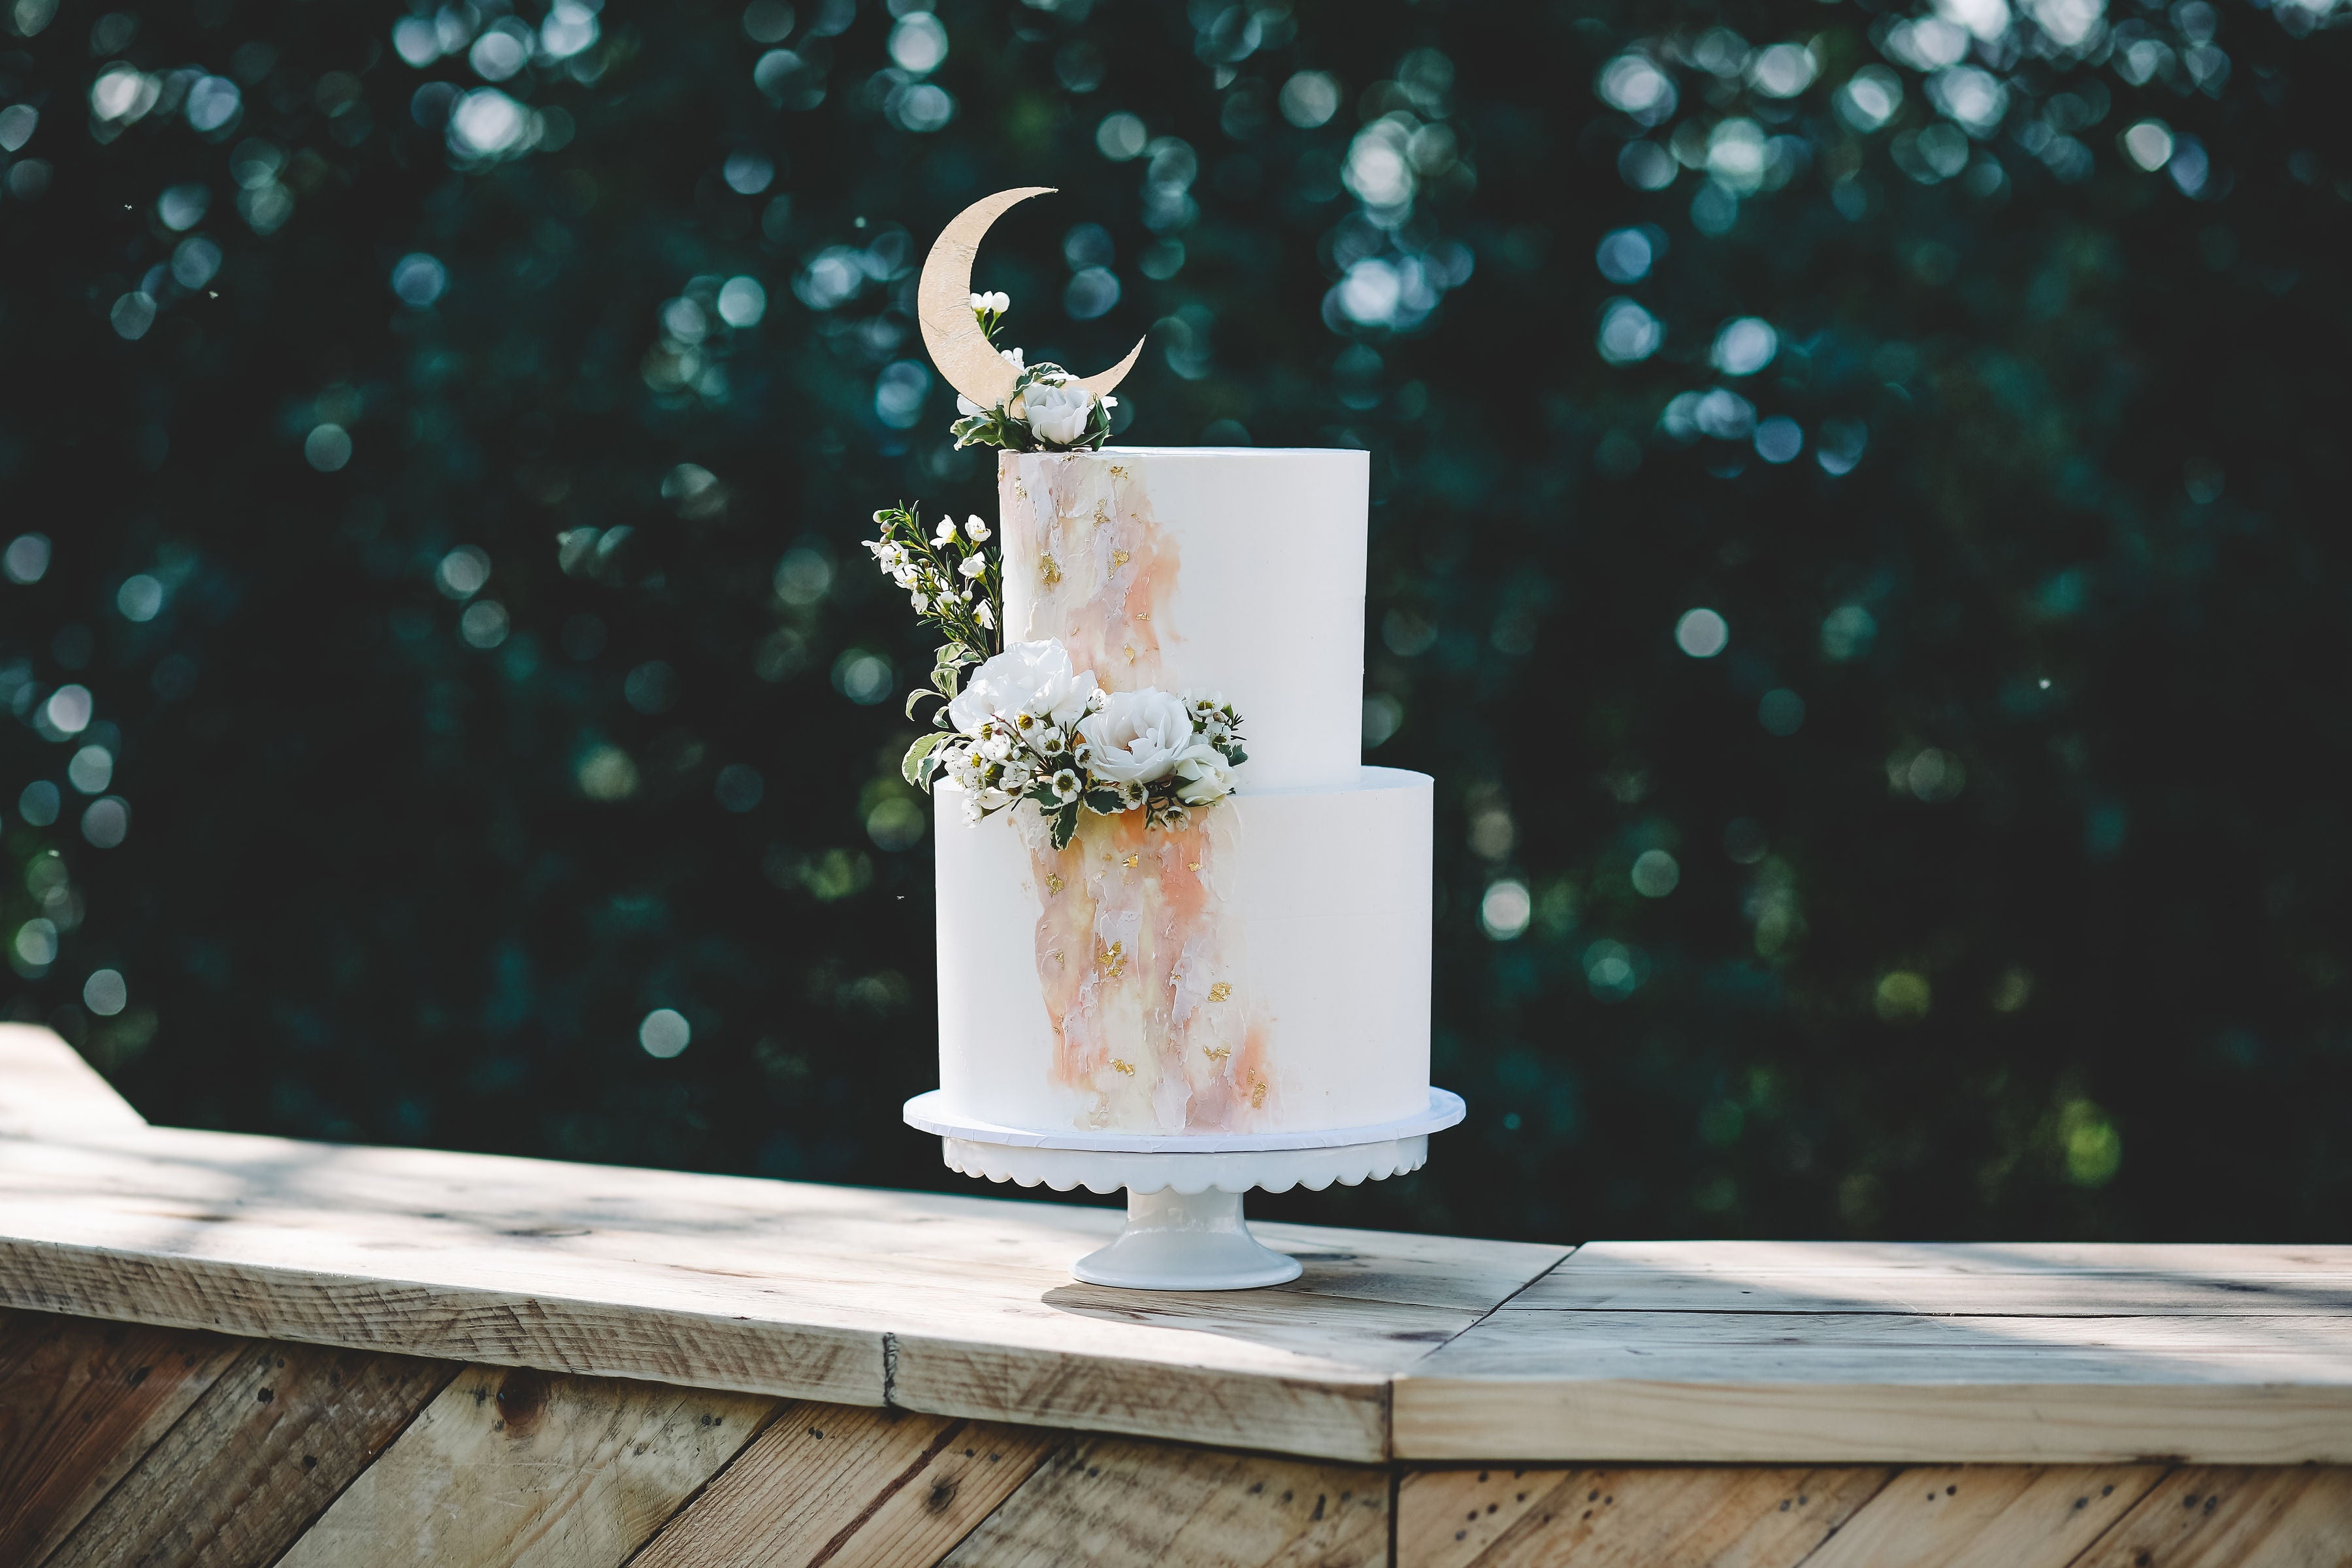 Skilled cake makers | Cakes to Please